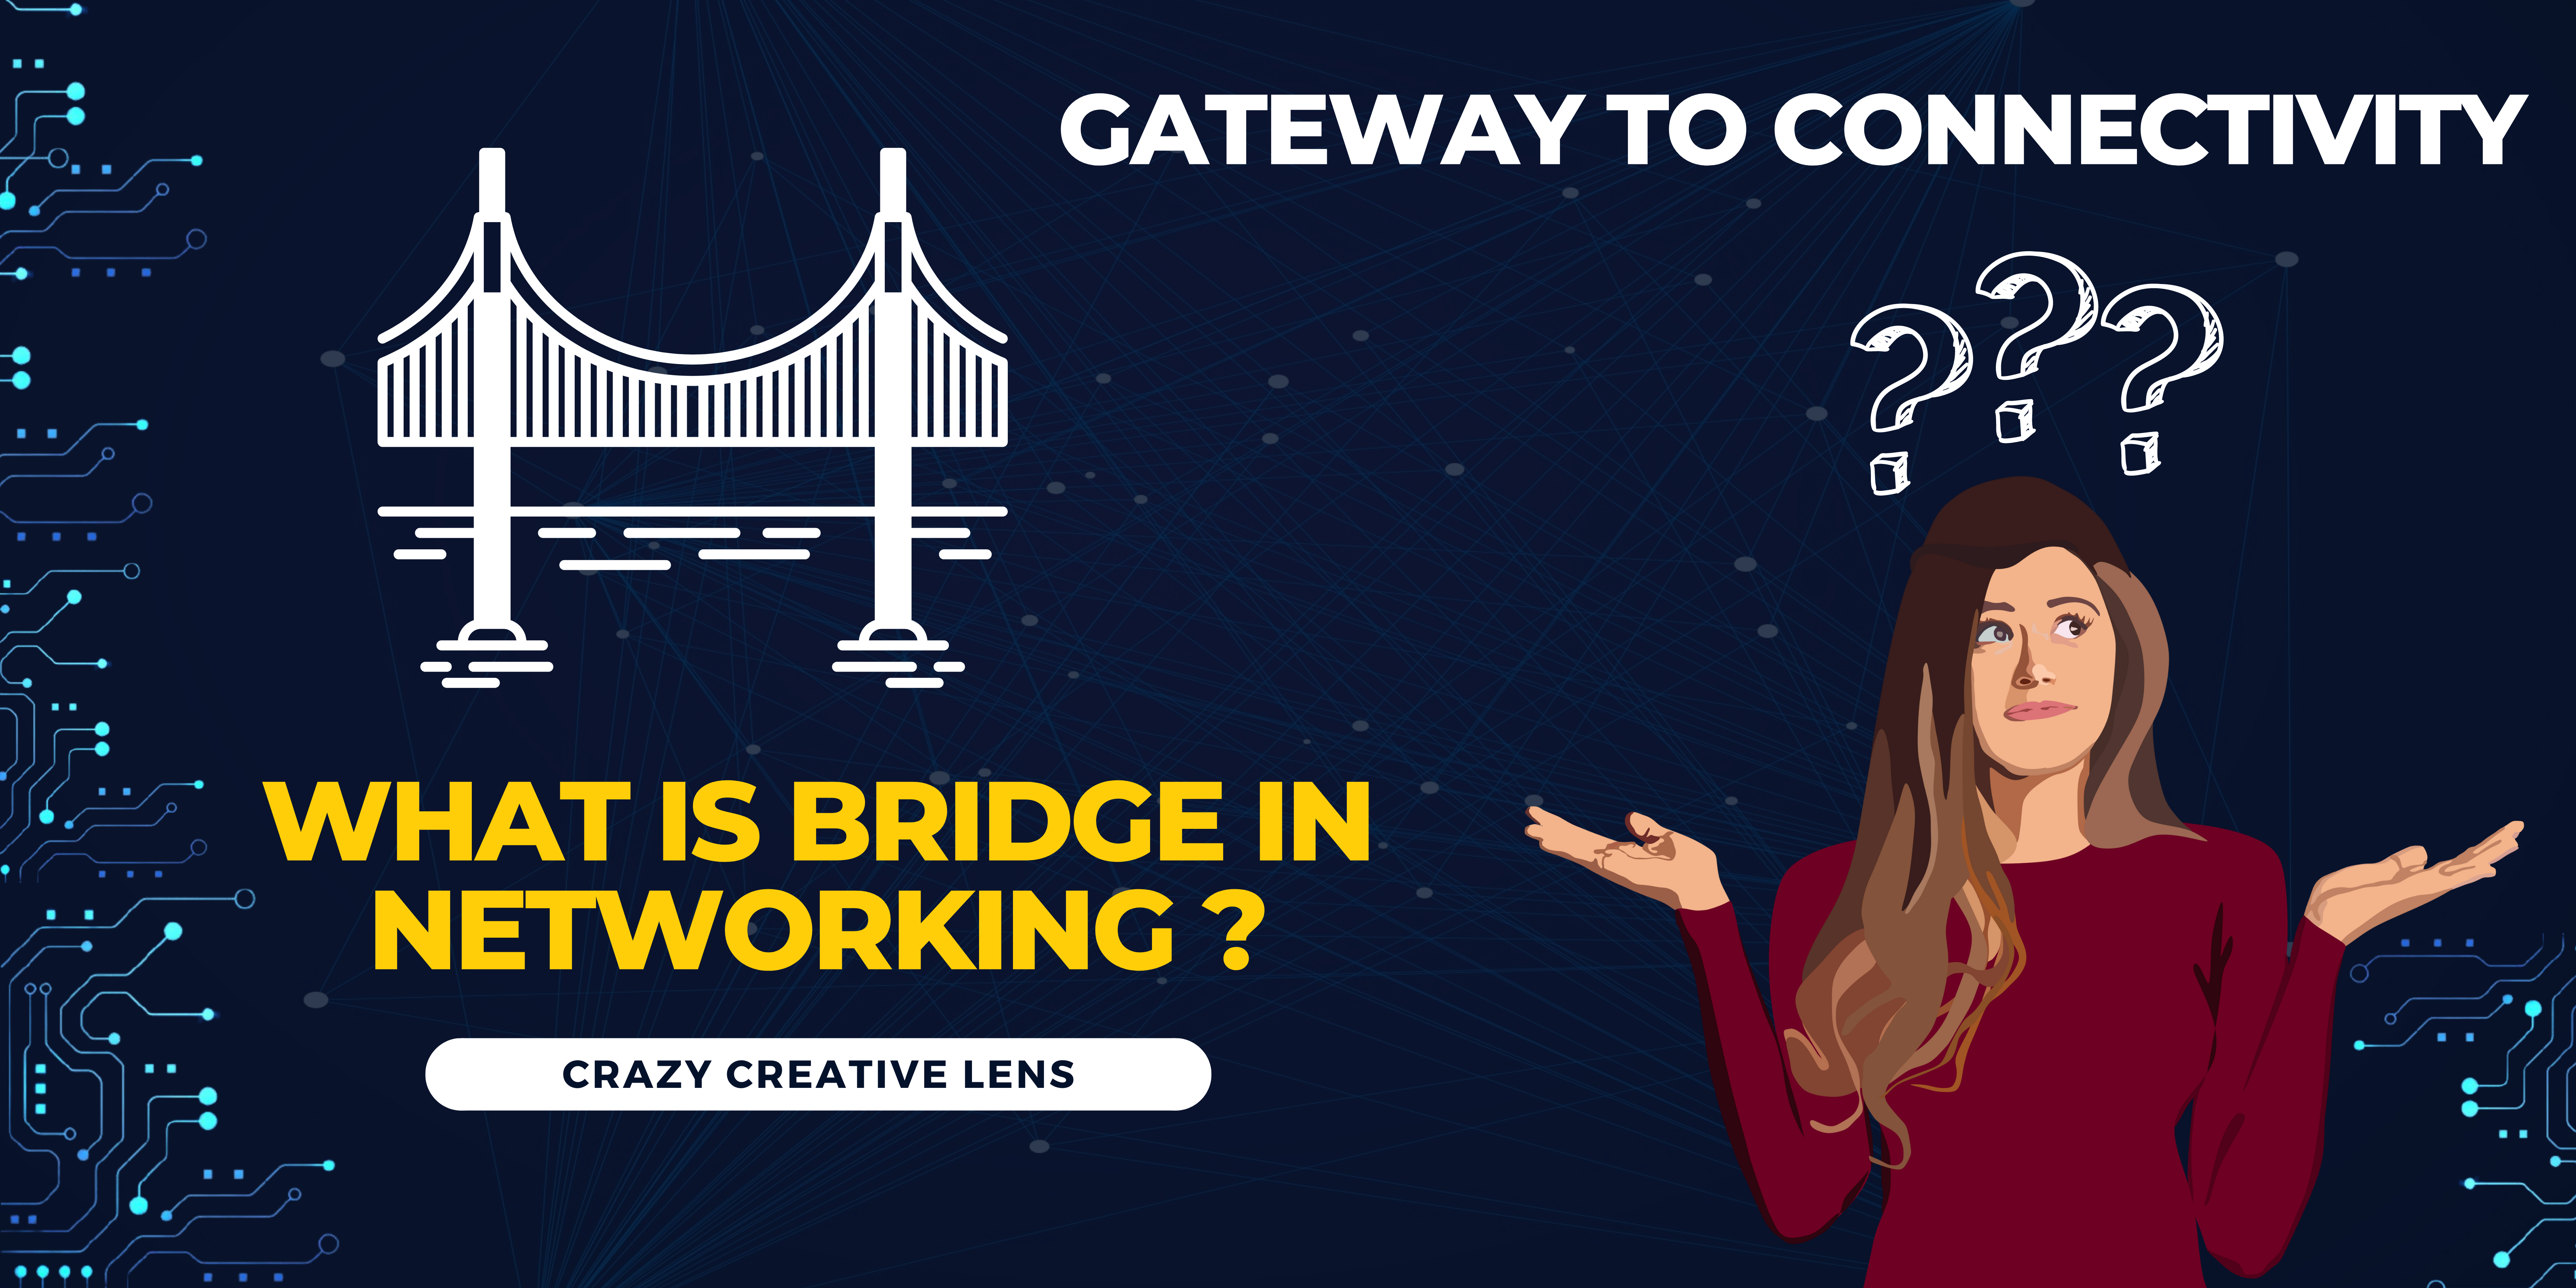 What is Bridge in Networking